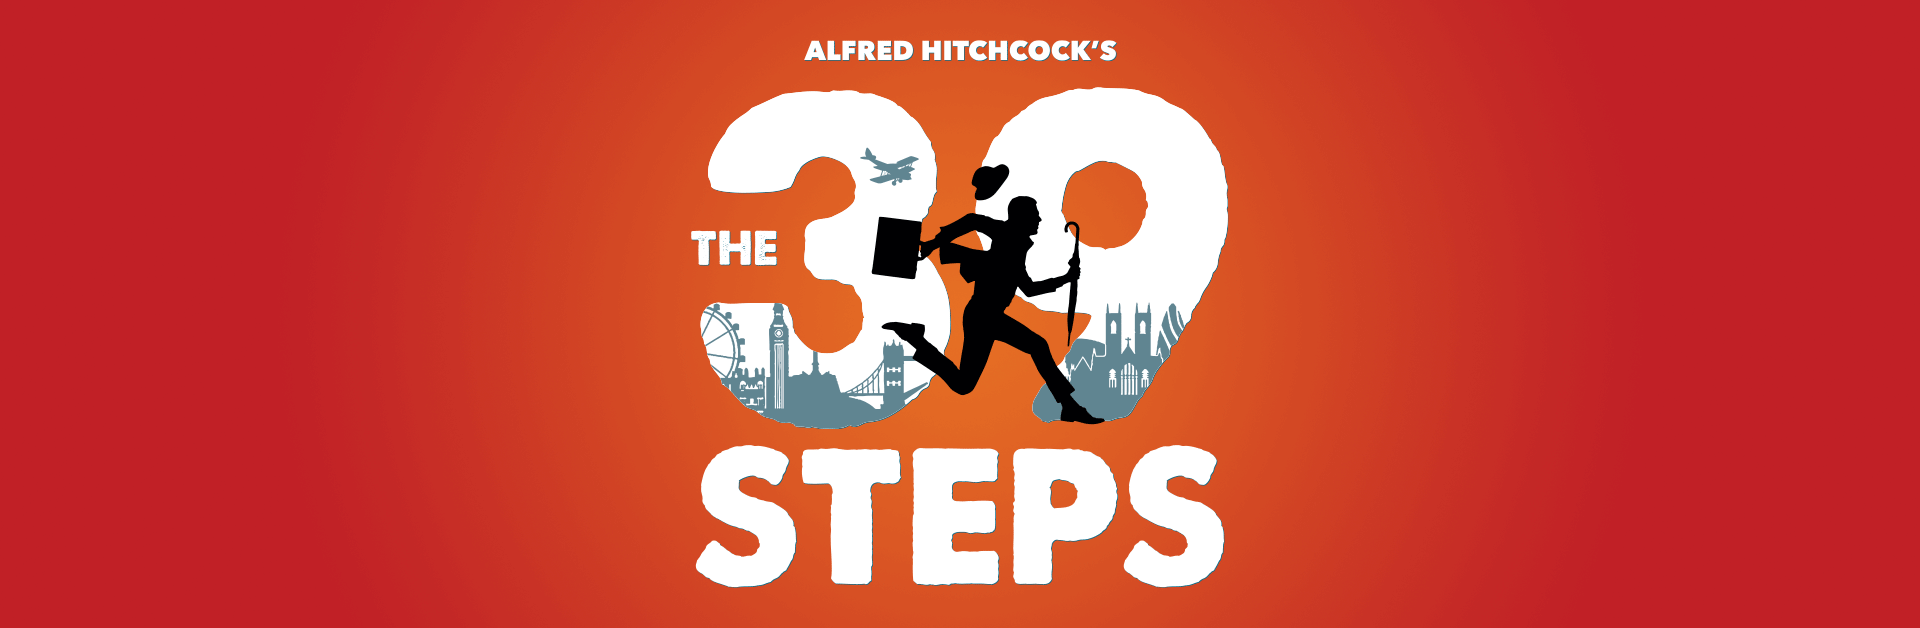 The 39 Steps Play Poster